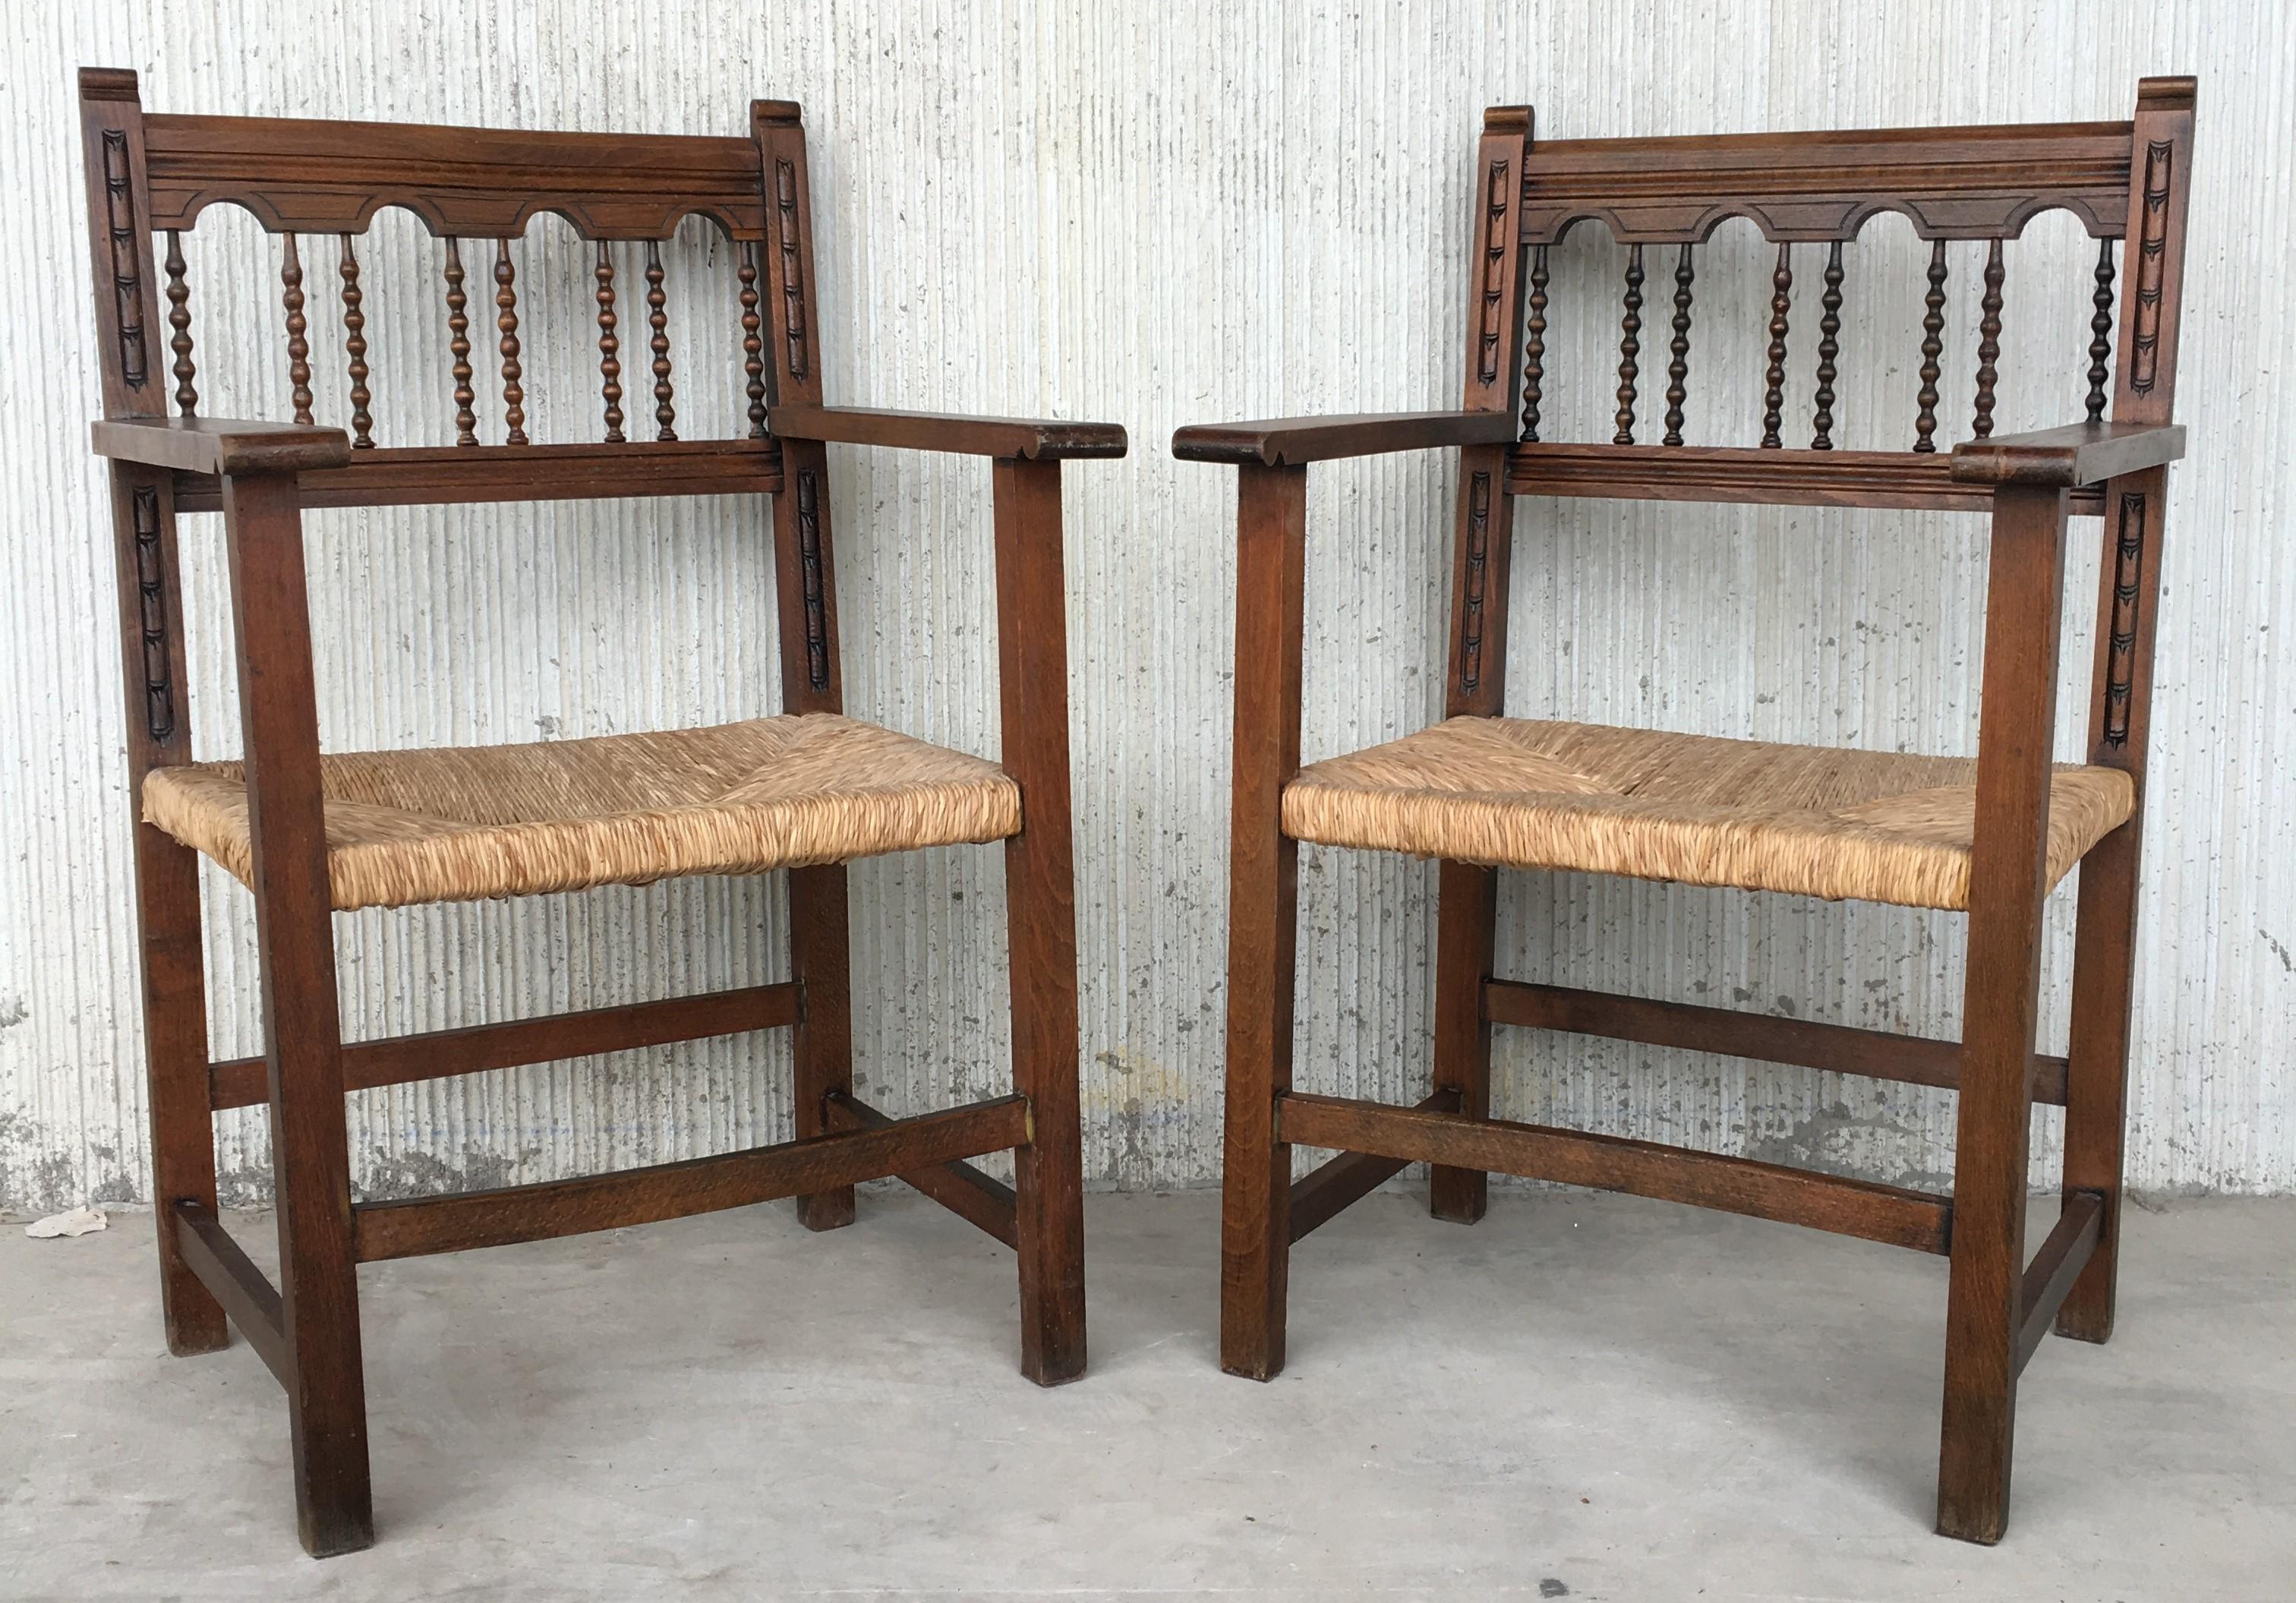 19th Spanish Colonial Altar armchairs with caned seat with ornamental carveds

Measures: Height to arms: 27.75.